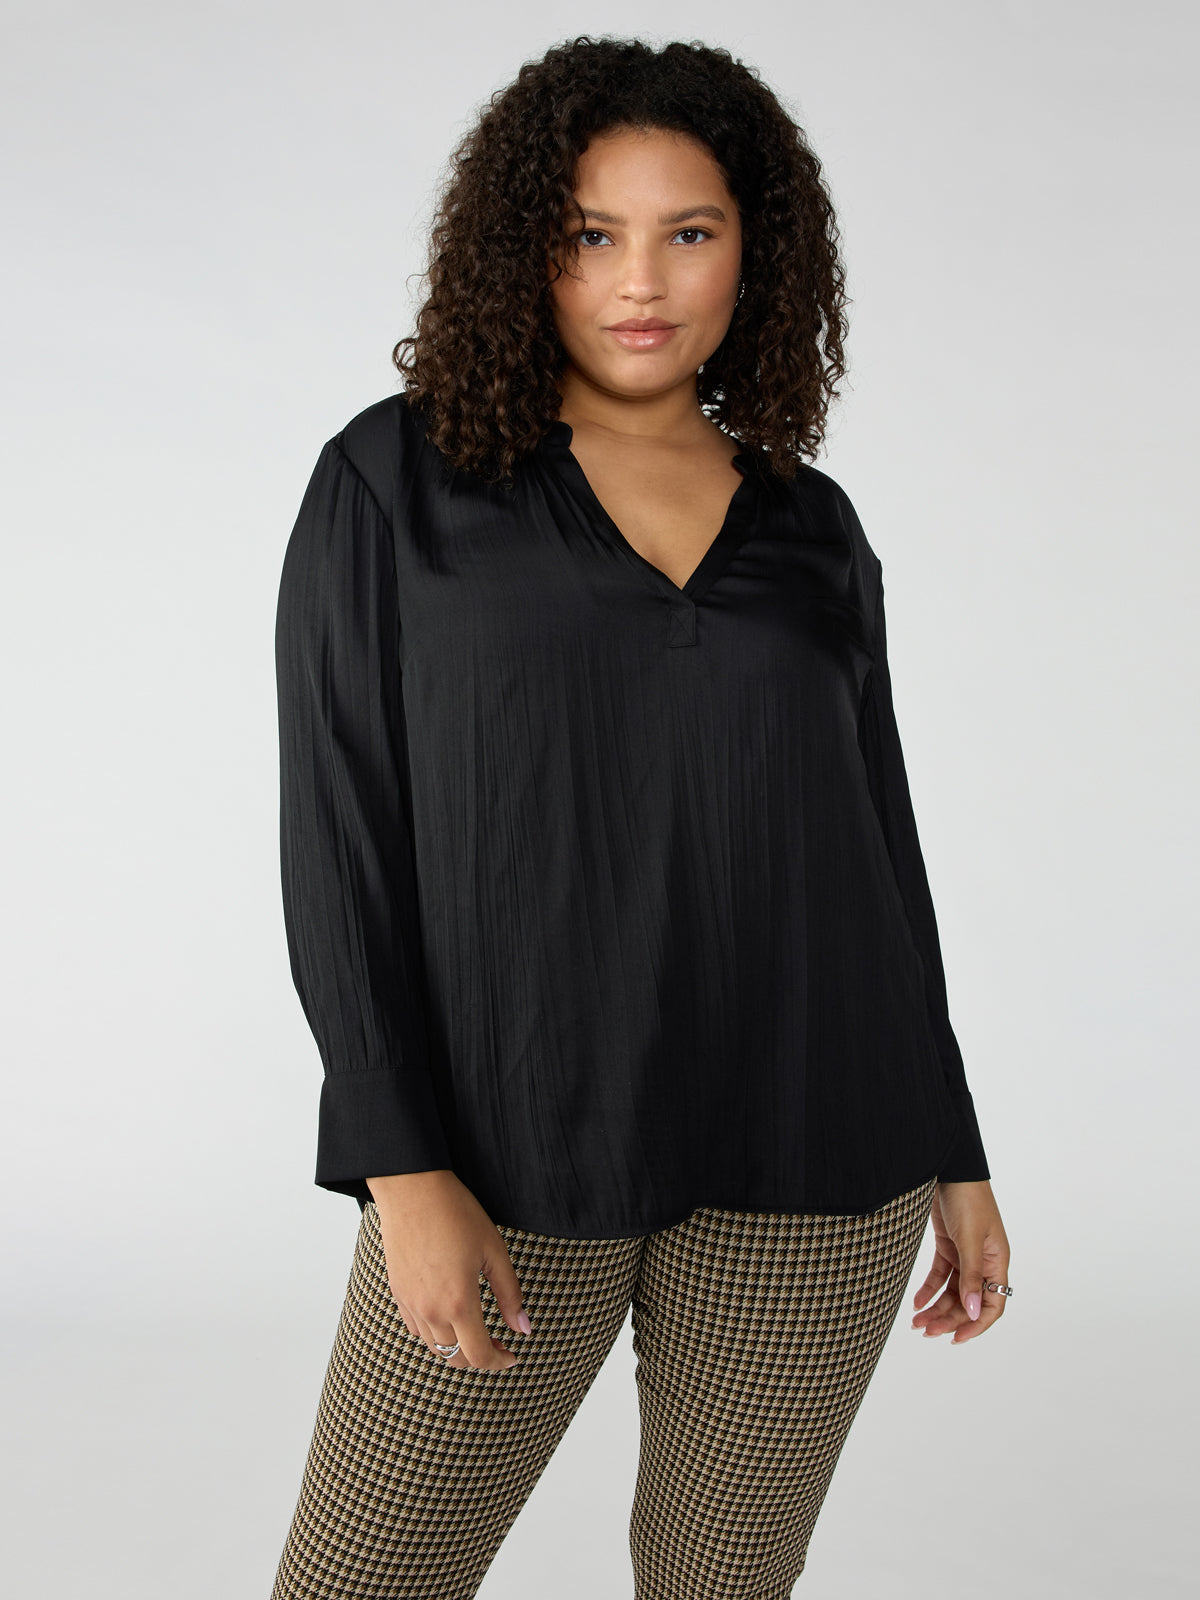 Lizzie Sateen Tunic Top Black Inclusive Collection